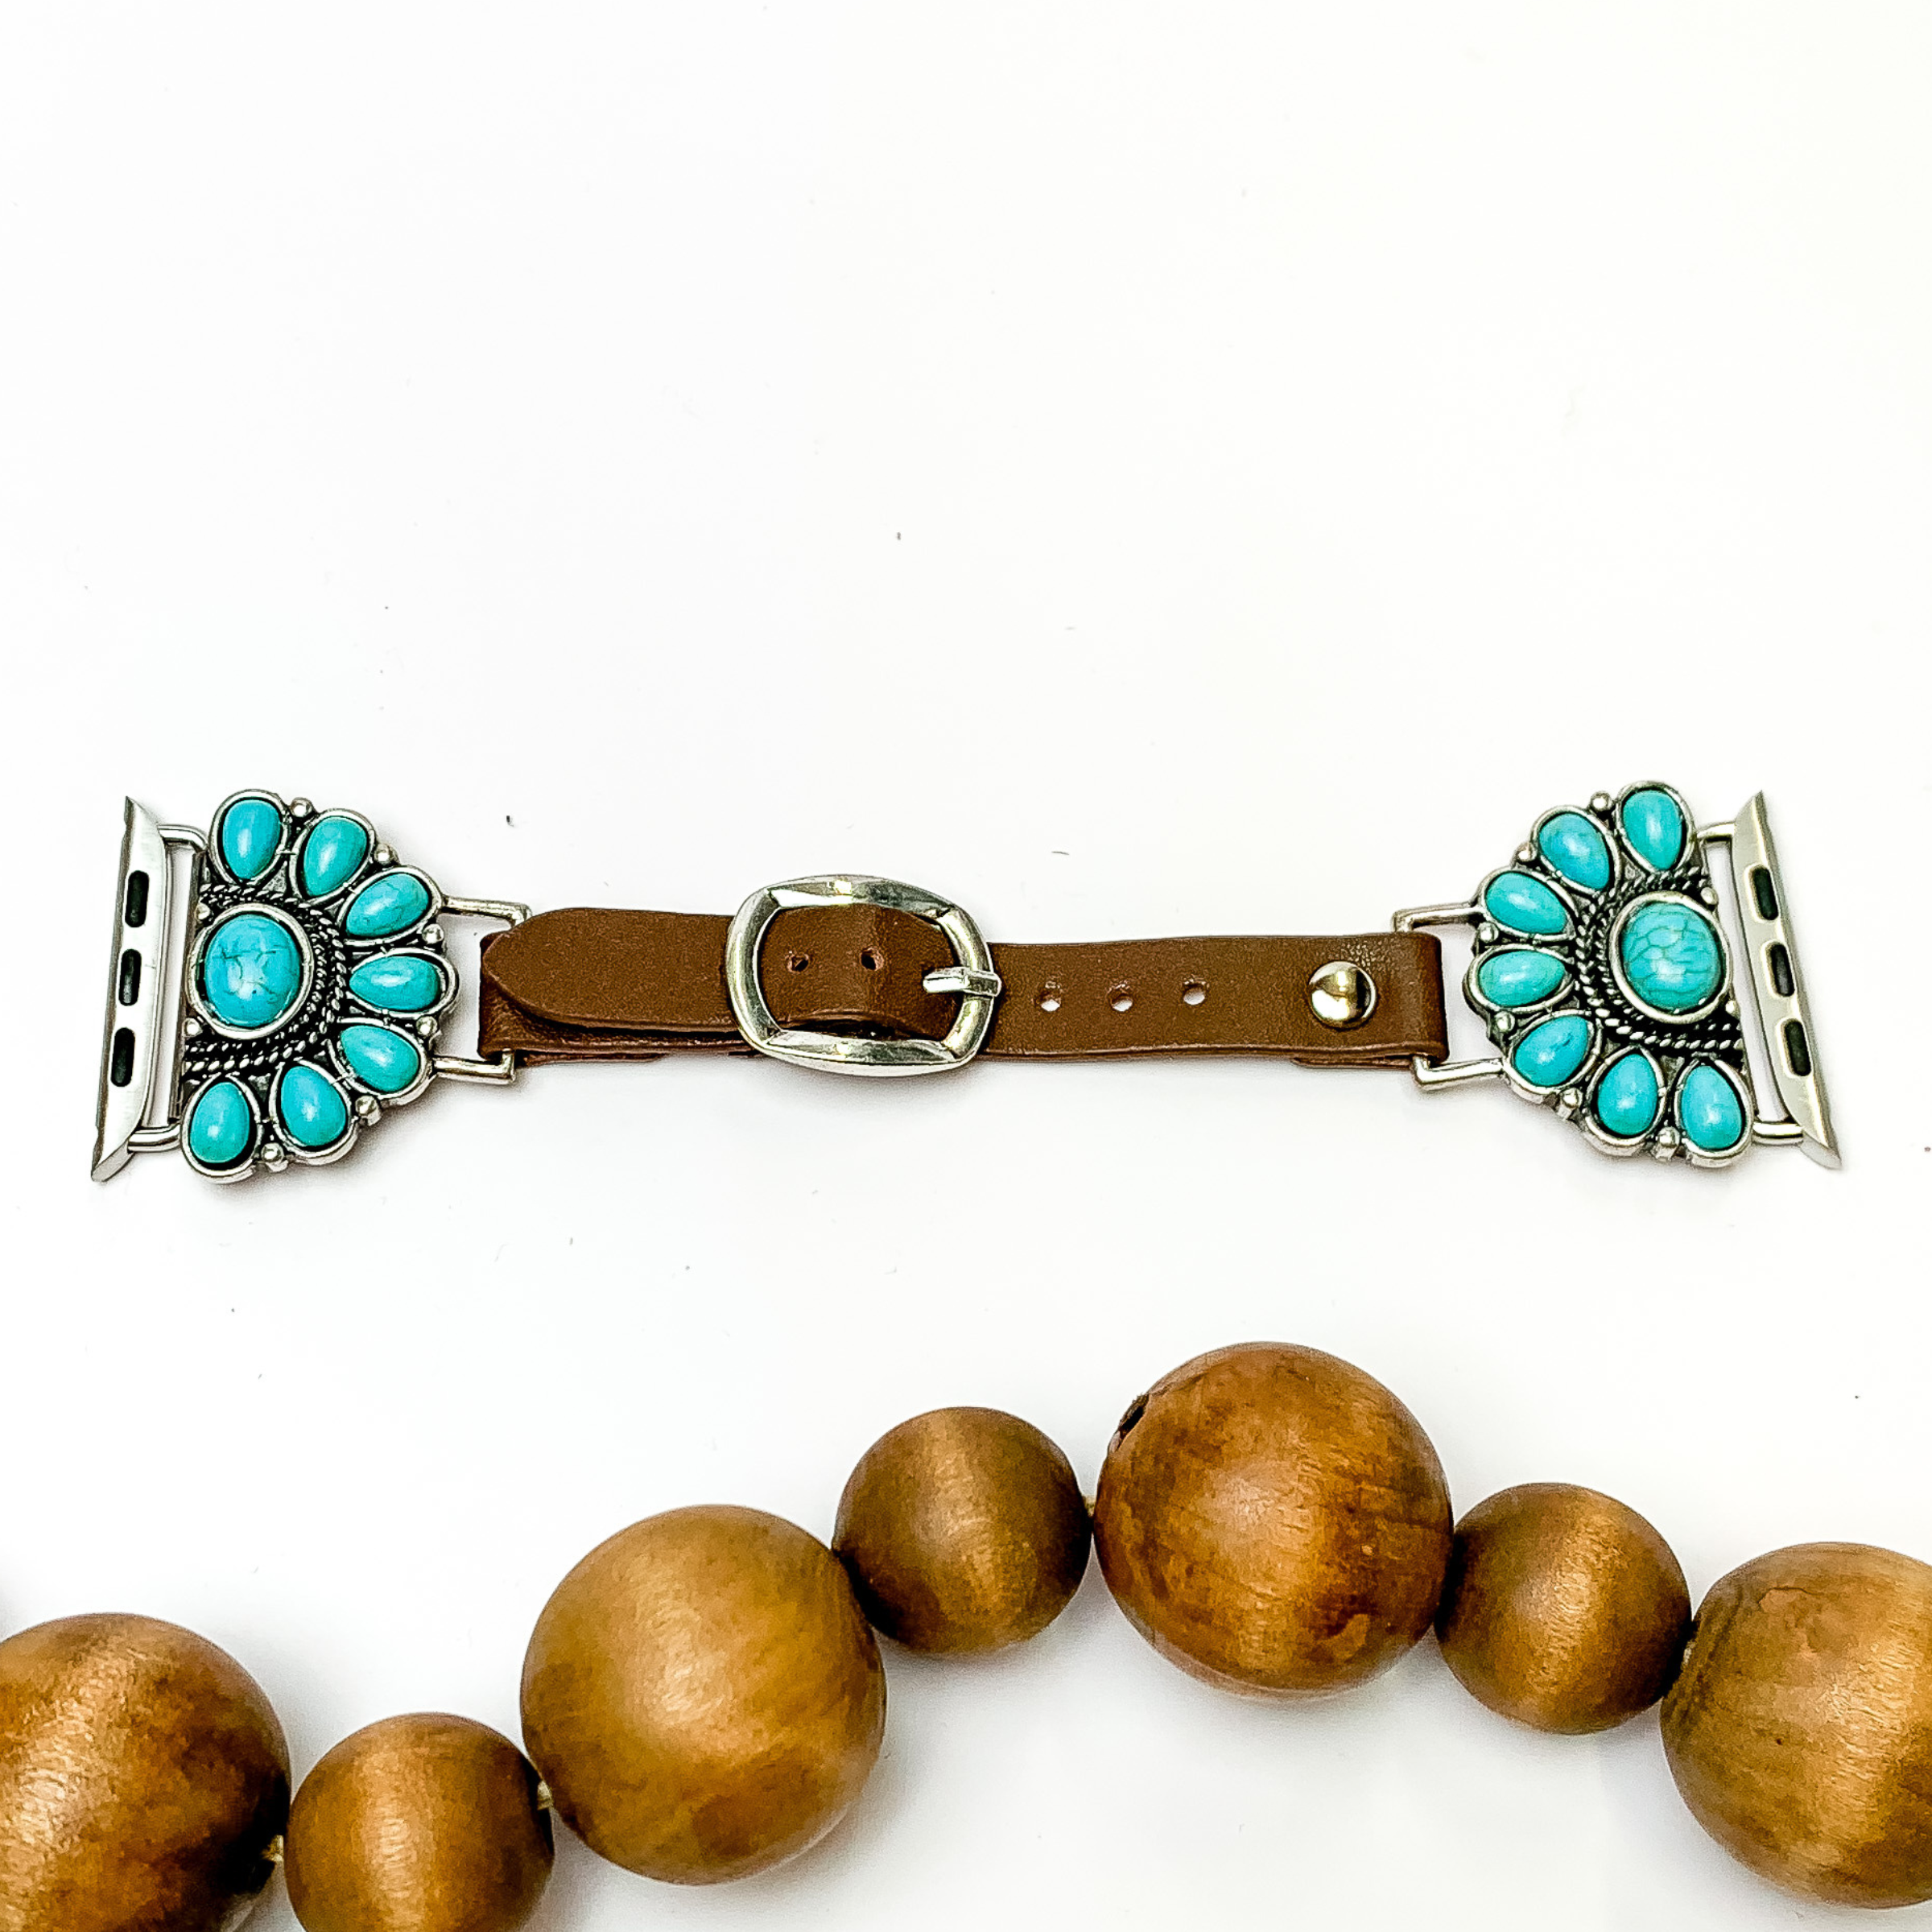 Dark Brown watch band with half, stone cluster pendants and Apple watch band acessories. The pendants include turquoise stones. This watch band is pictured on a white background with brown beads below the band. 